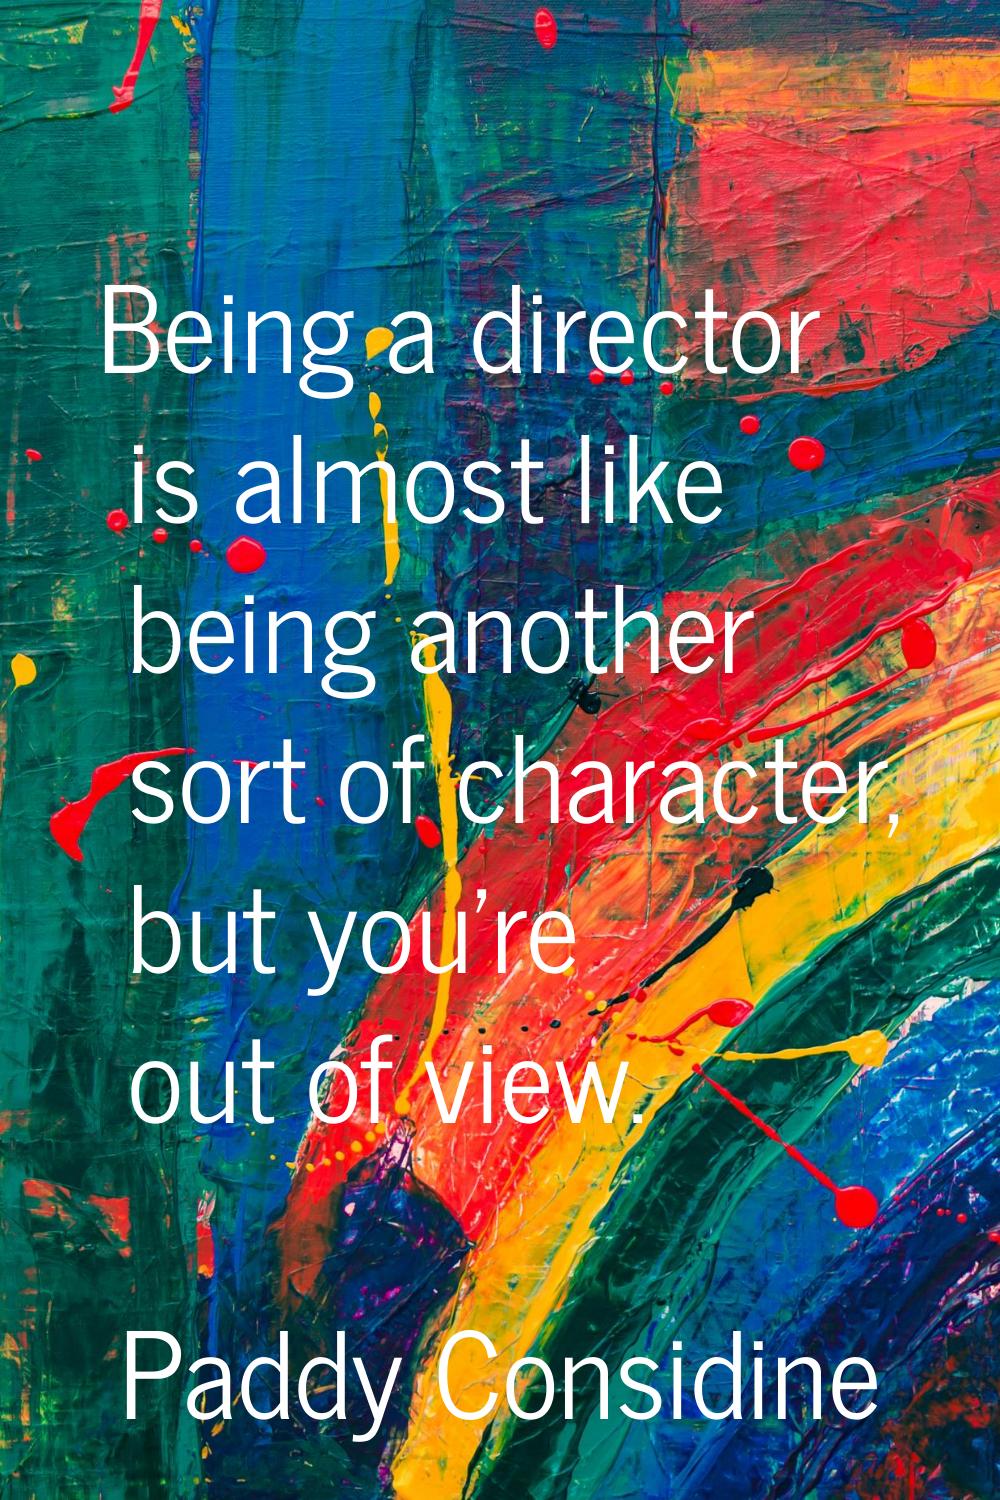 Being a director is almost like being another sort of character, but you're out of view.